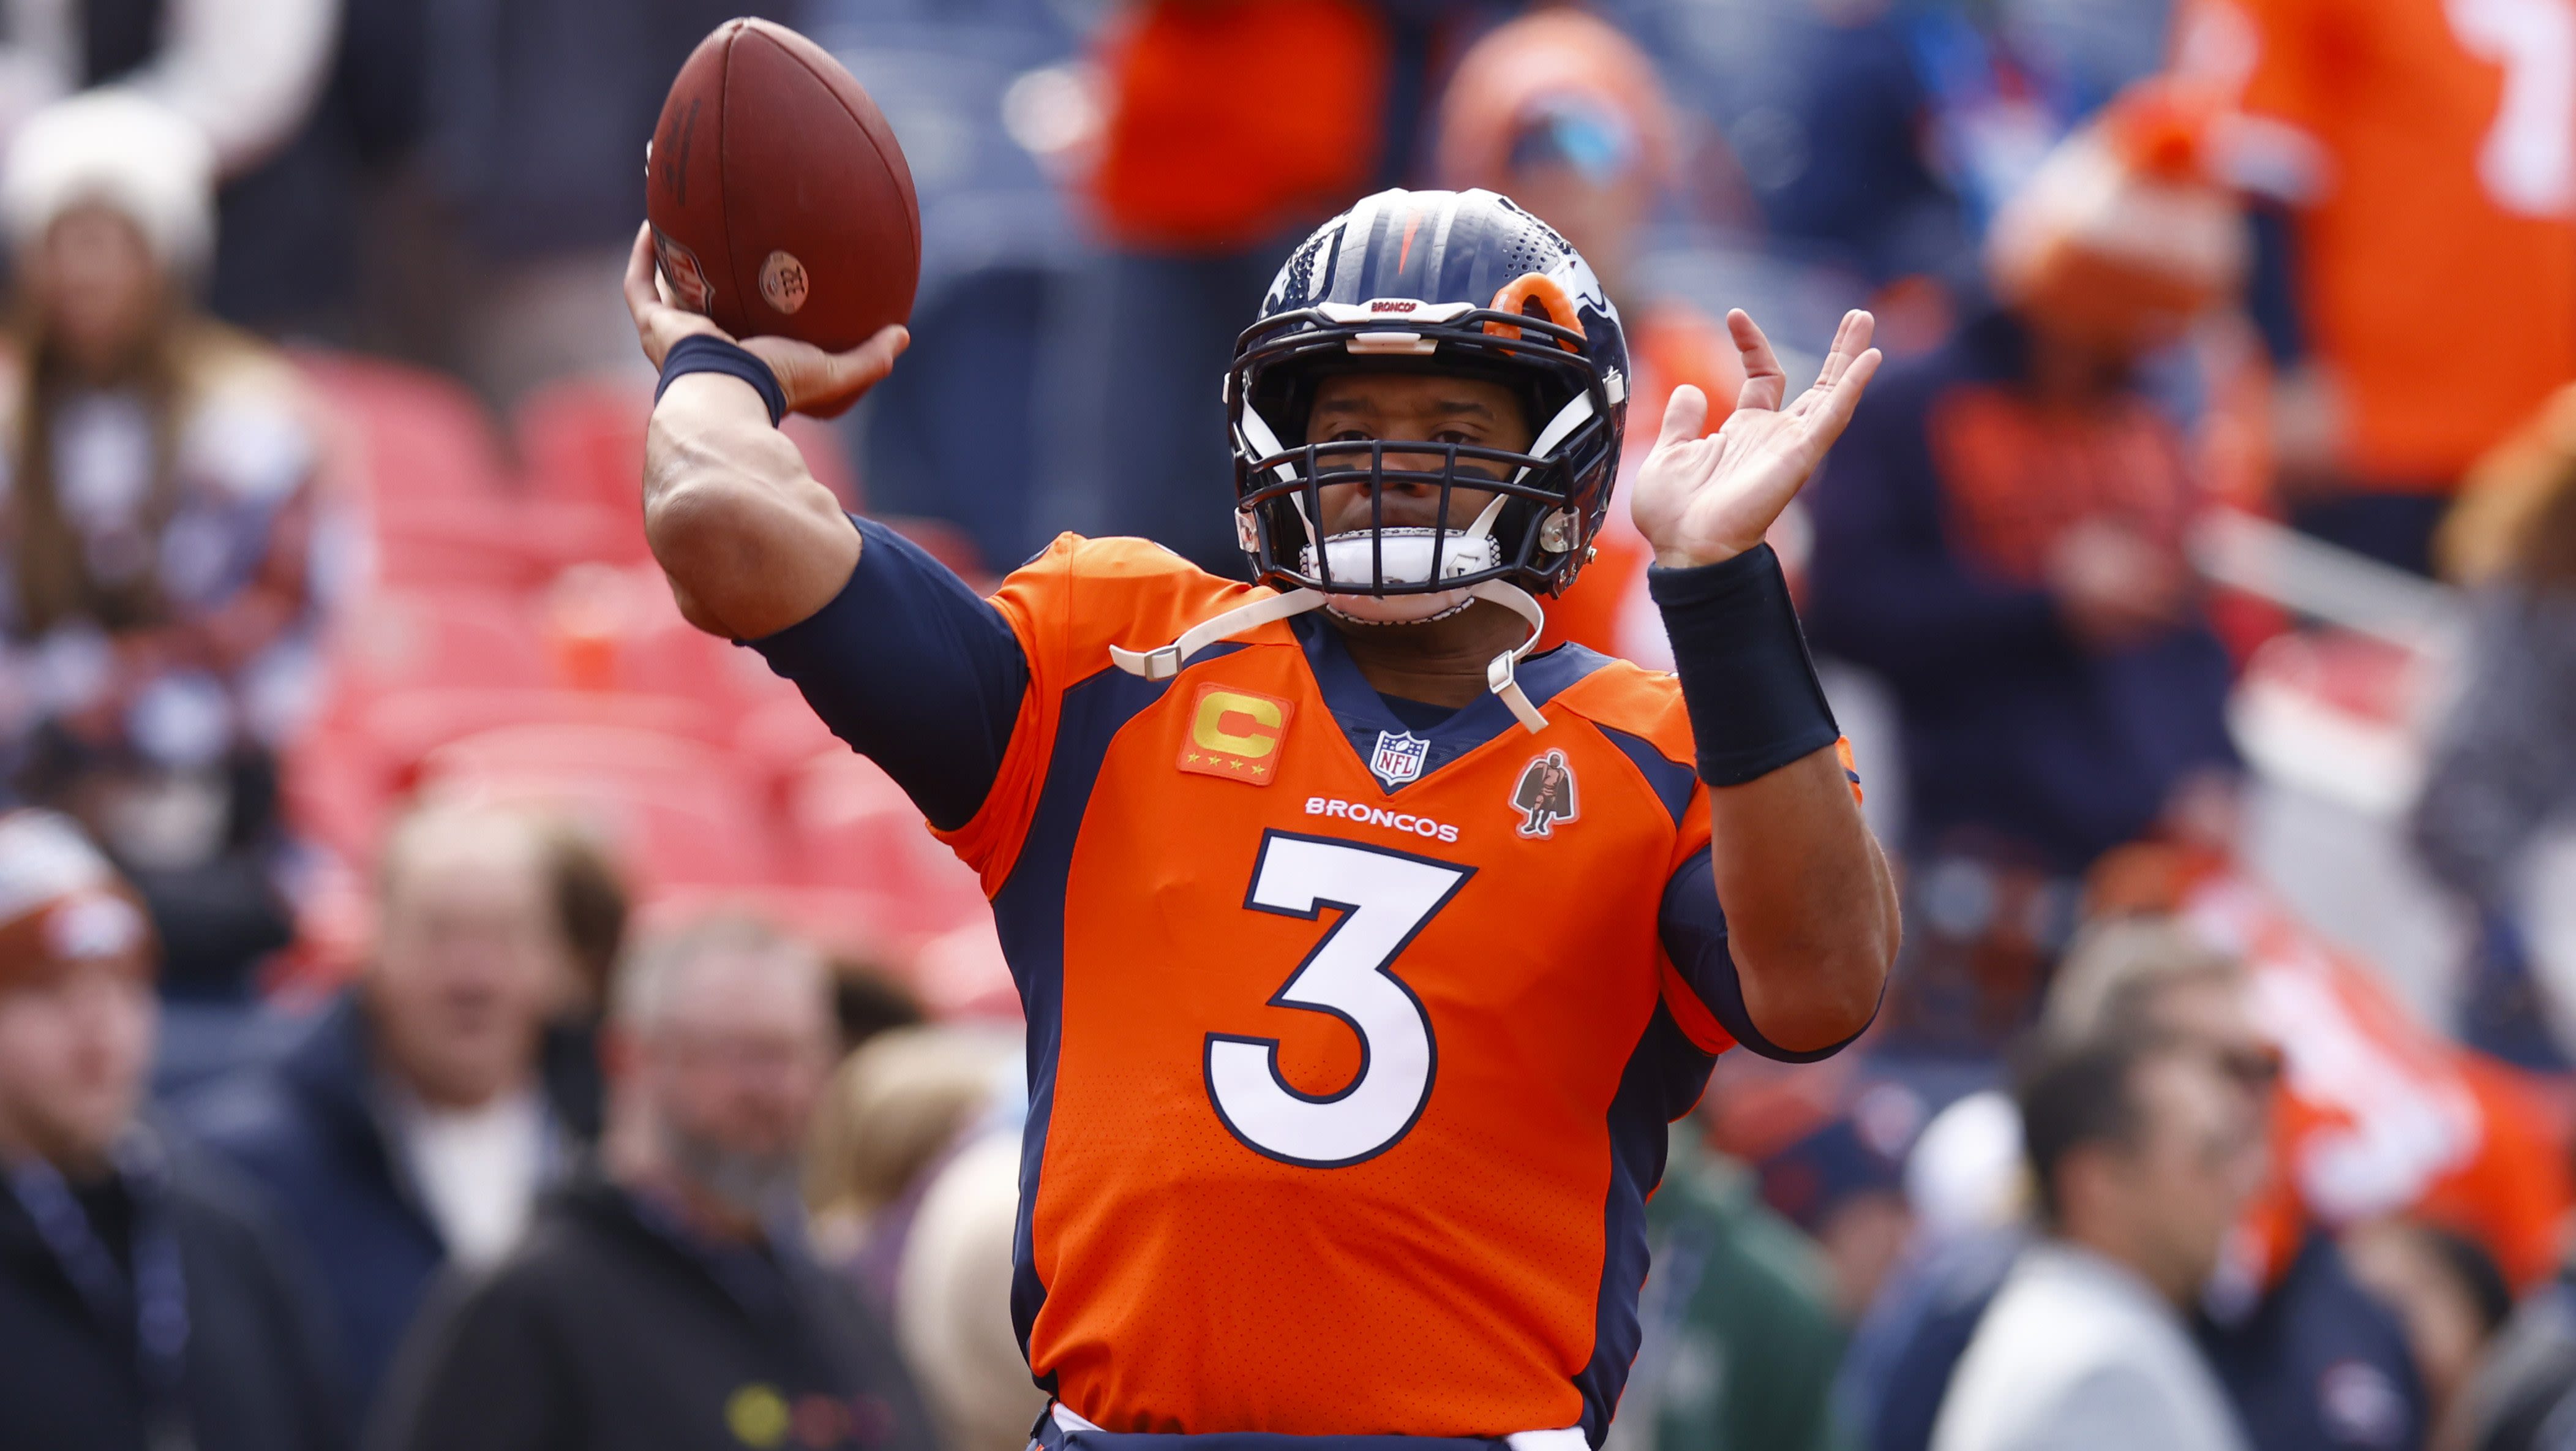 Broncos Fans Should Take a ‘Chill Pill’ on Russell Wilson Talk, Writer Says